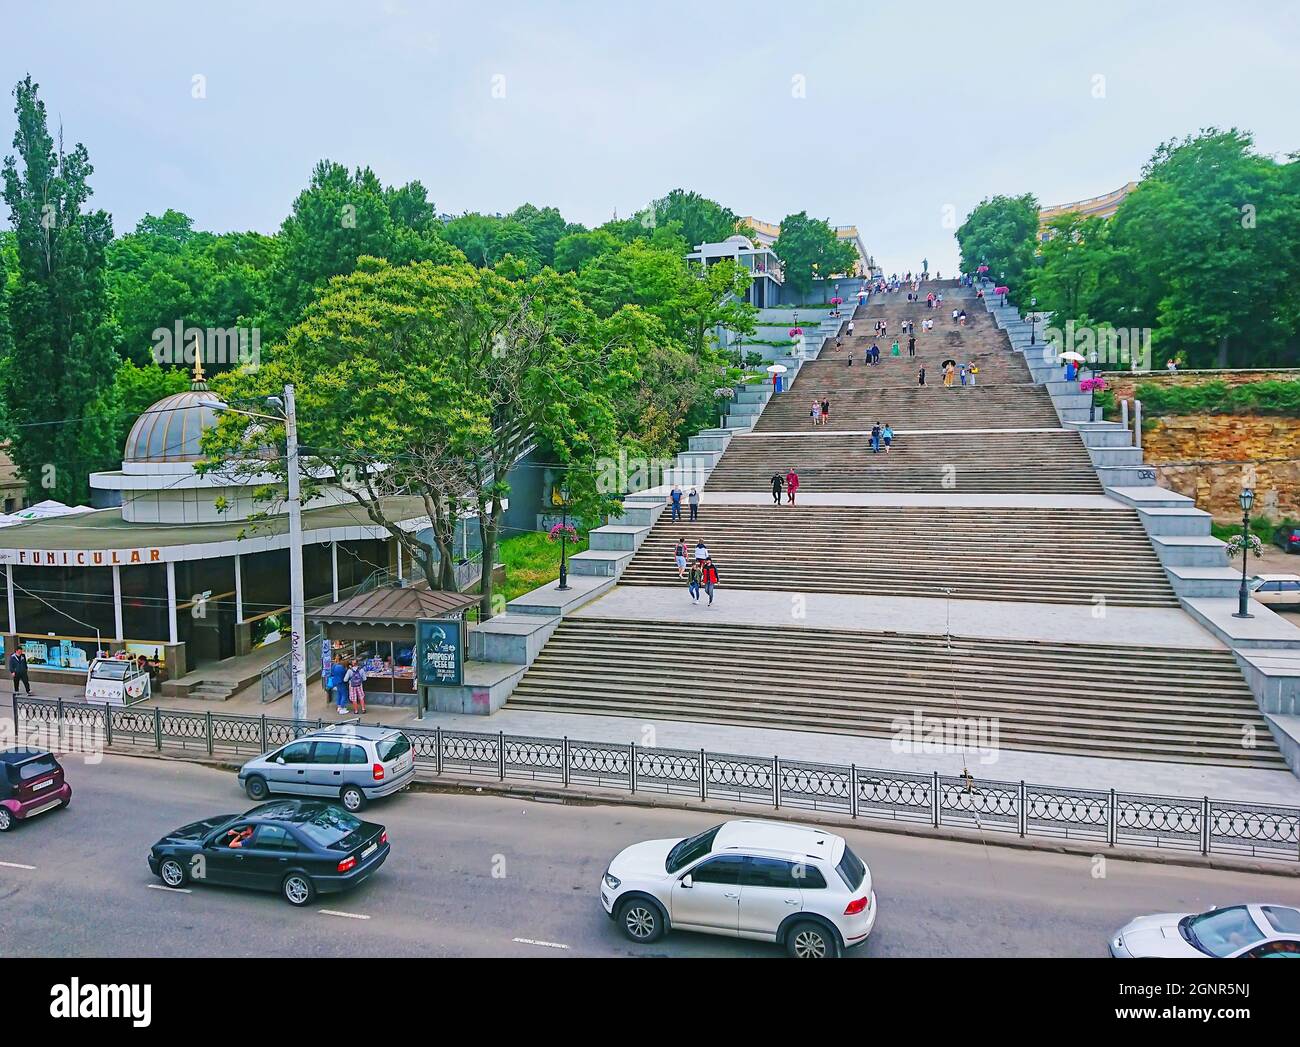 ODESSA, UKRAINE - June 19, 2021: The famous Potemkin Stairs, connecting Primorsky Boulevard with Odessa Sea Port, on June 19 in Odessa Stock Photo